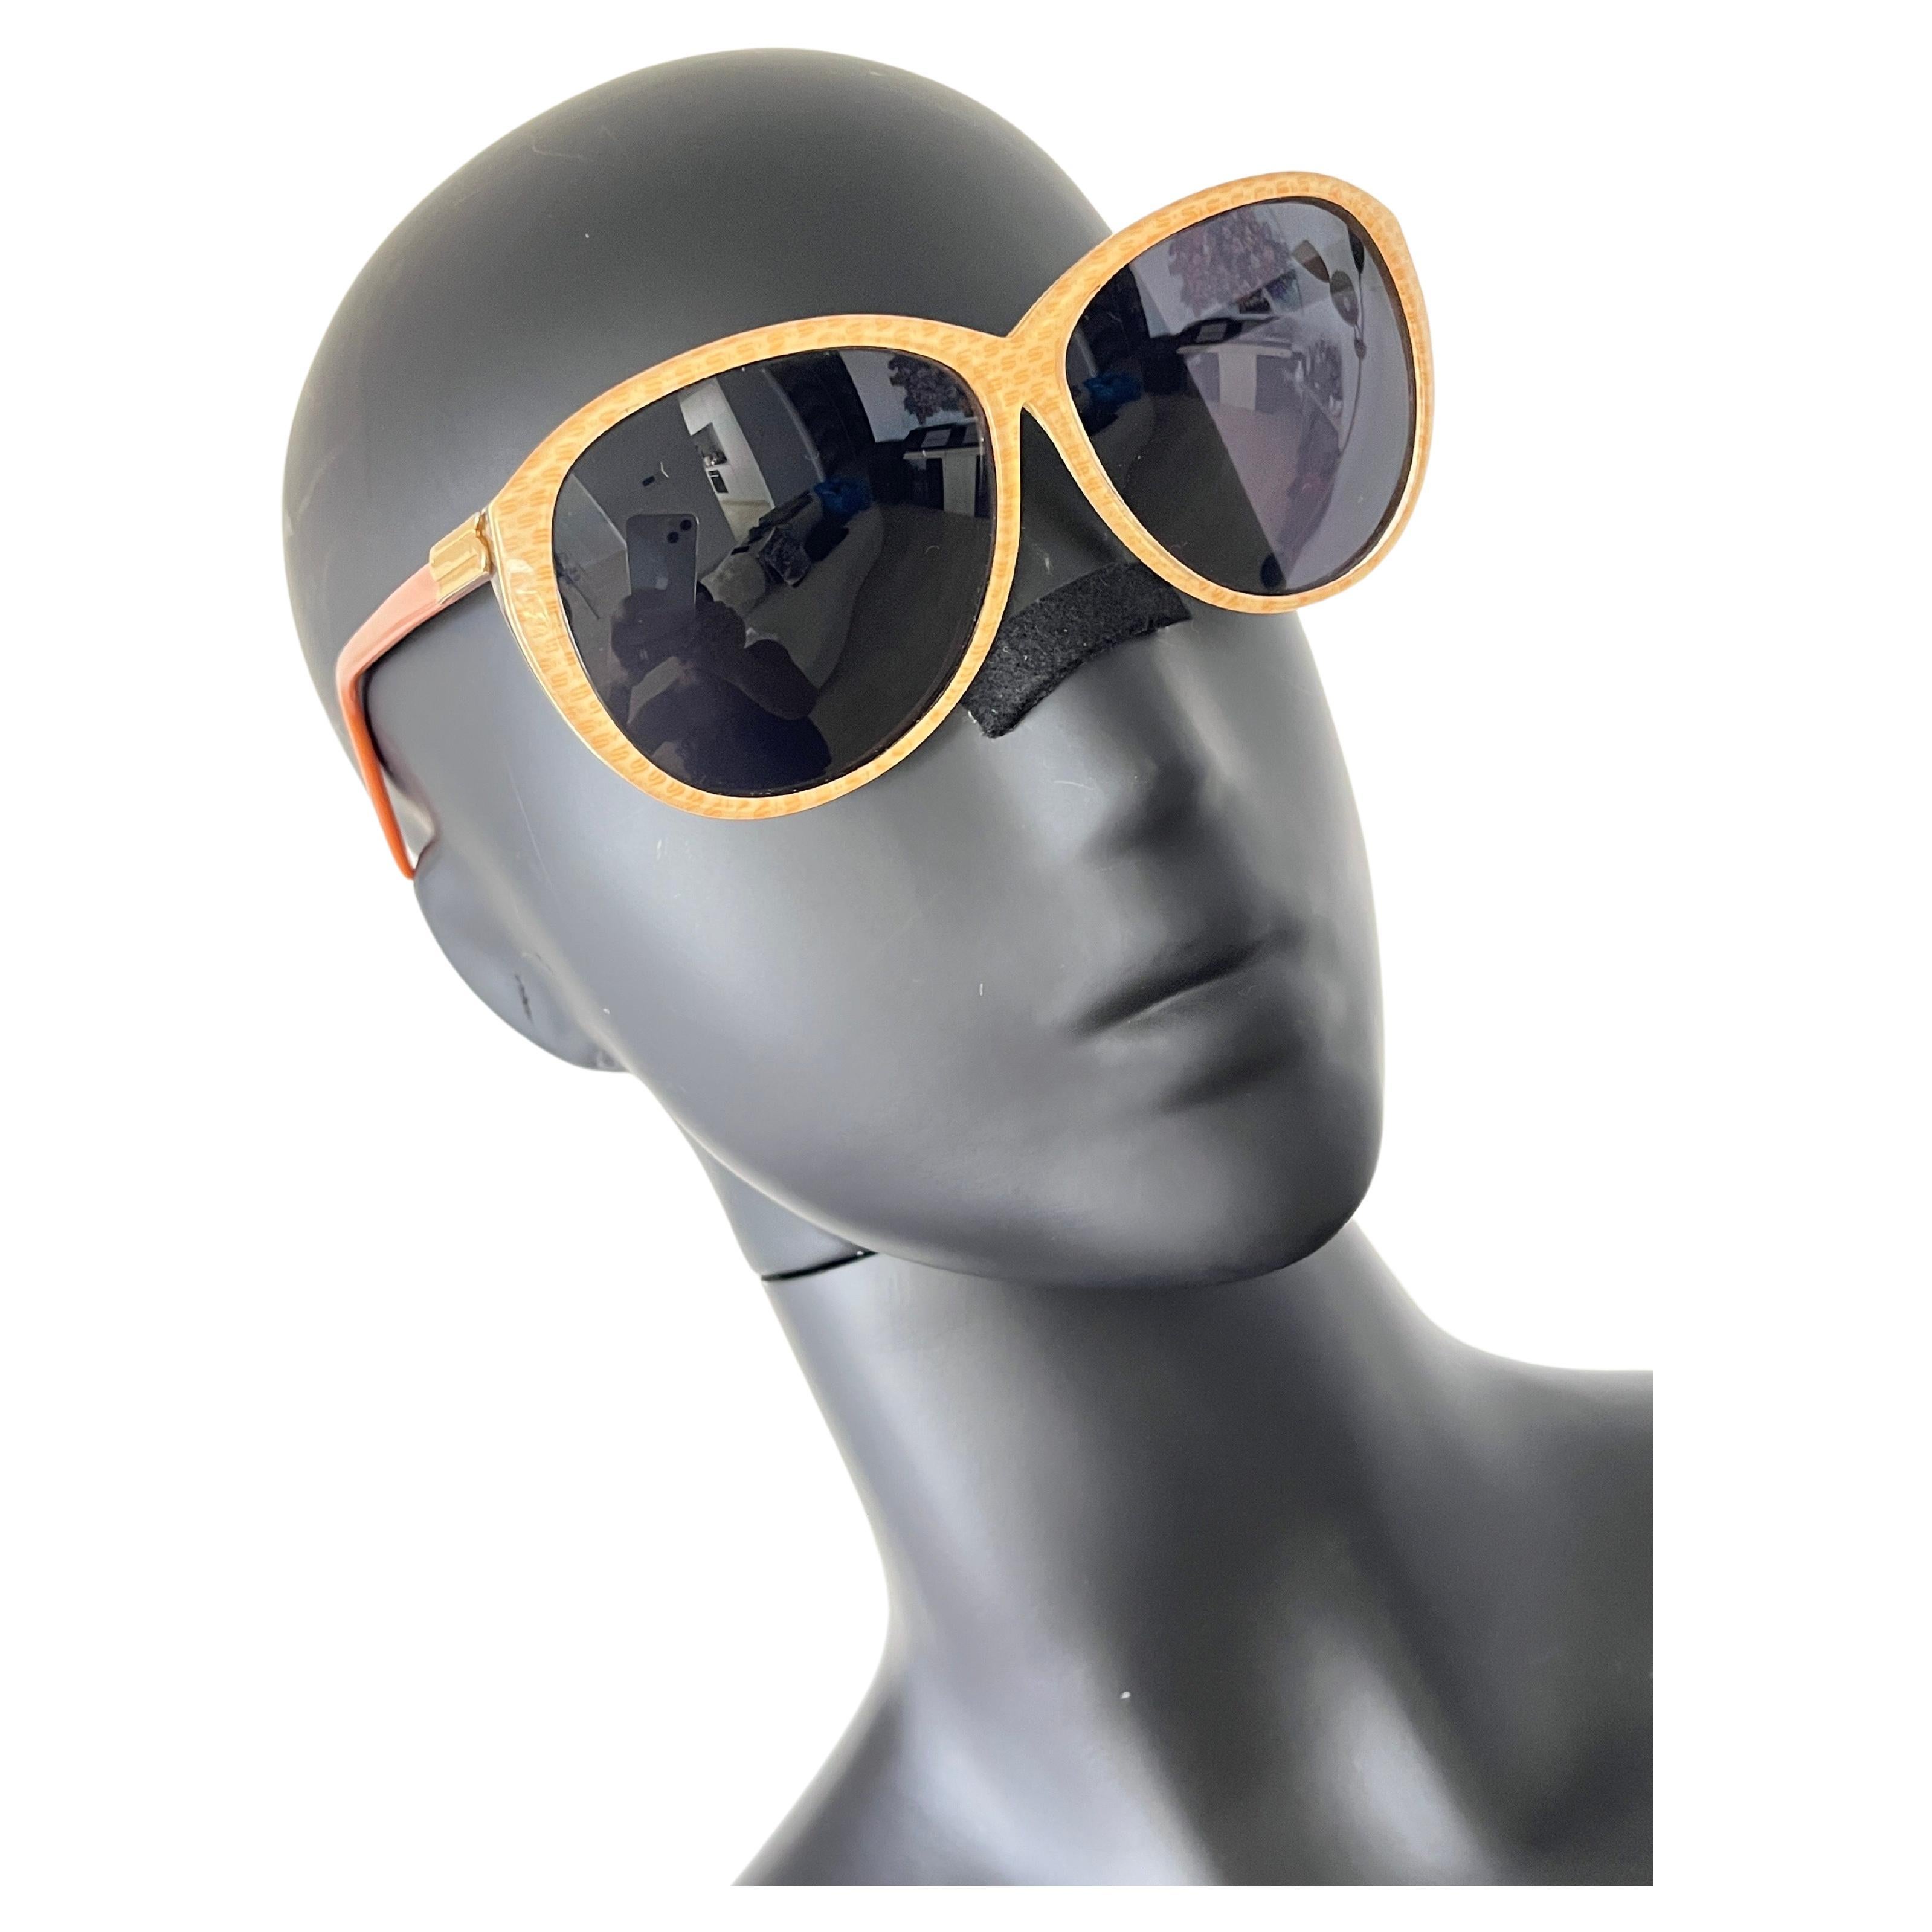 Vintage 1980’s 2 tone apricot sunglasses by Silhouette